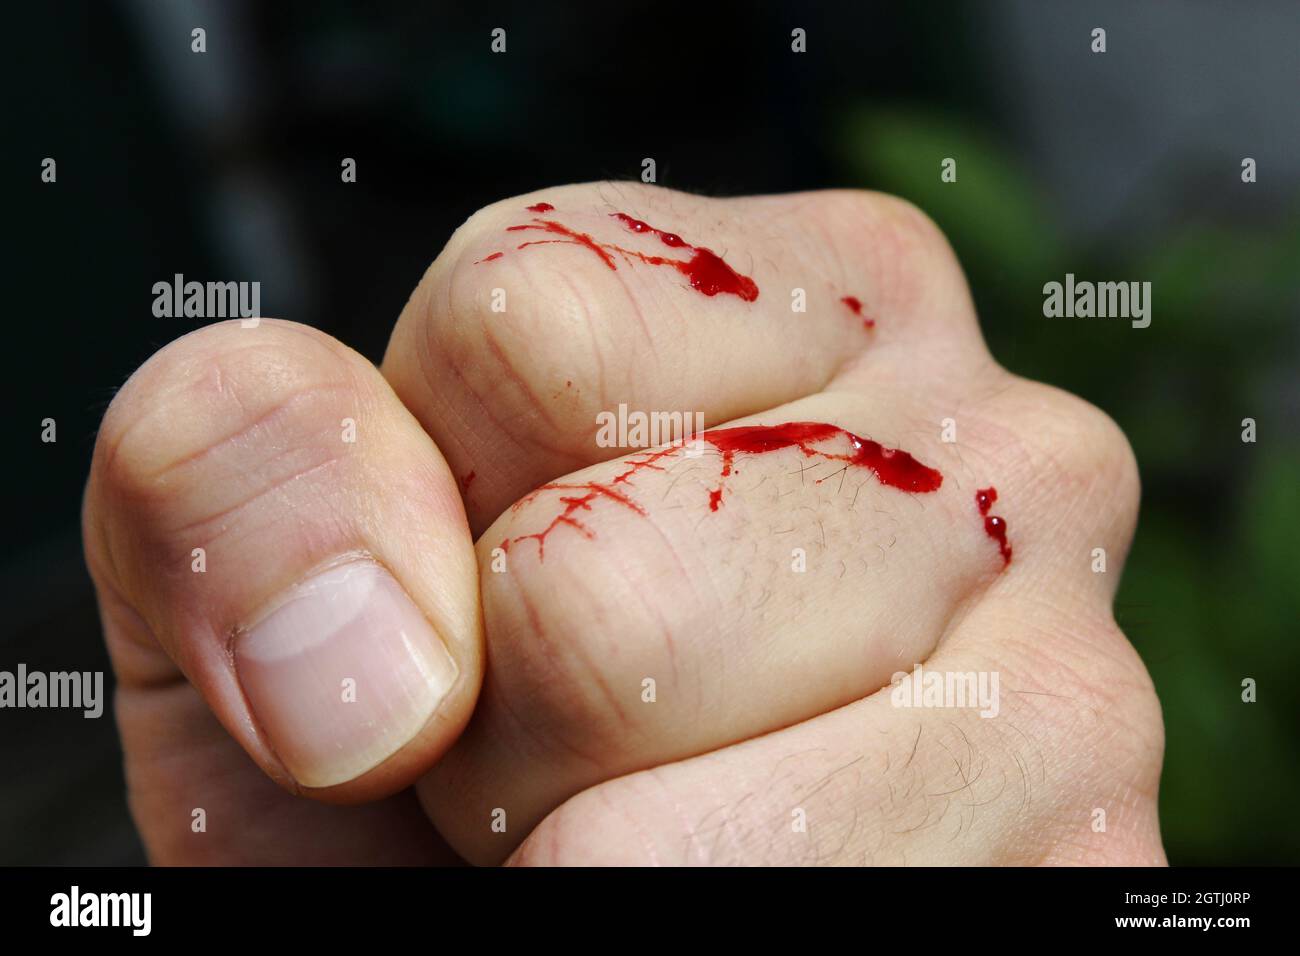 Fresh Wounds Bleeding Cat Claw Scratch Lacerated Cut Fingers, Young Middle-aged Mans Left Hand Fist Stock Photo